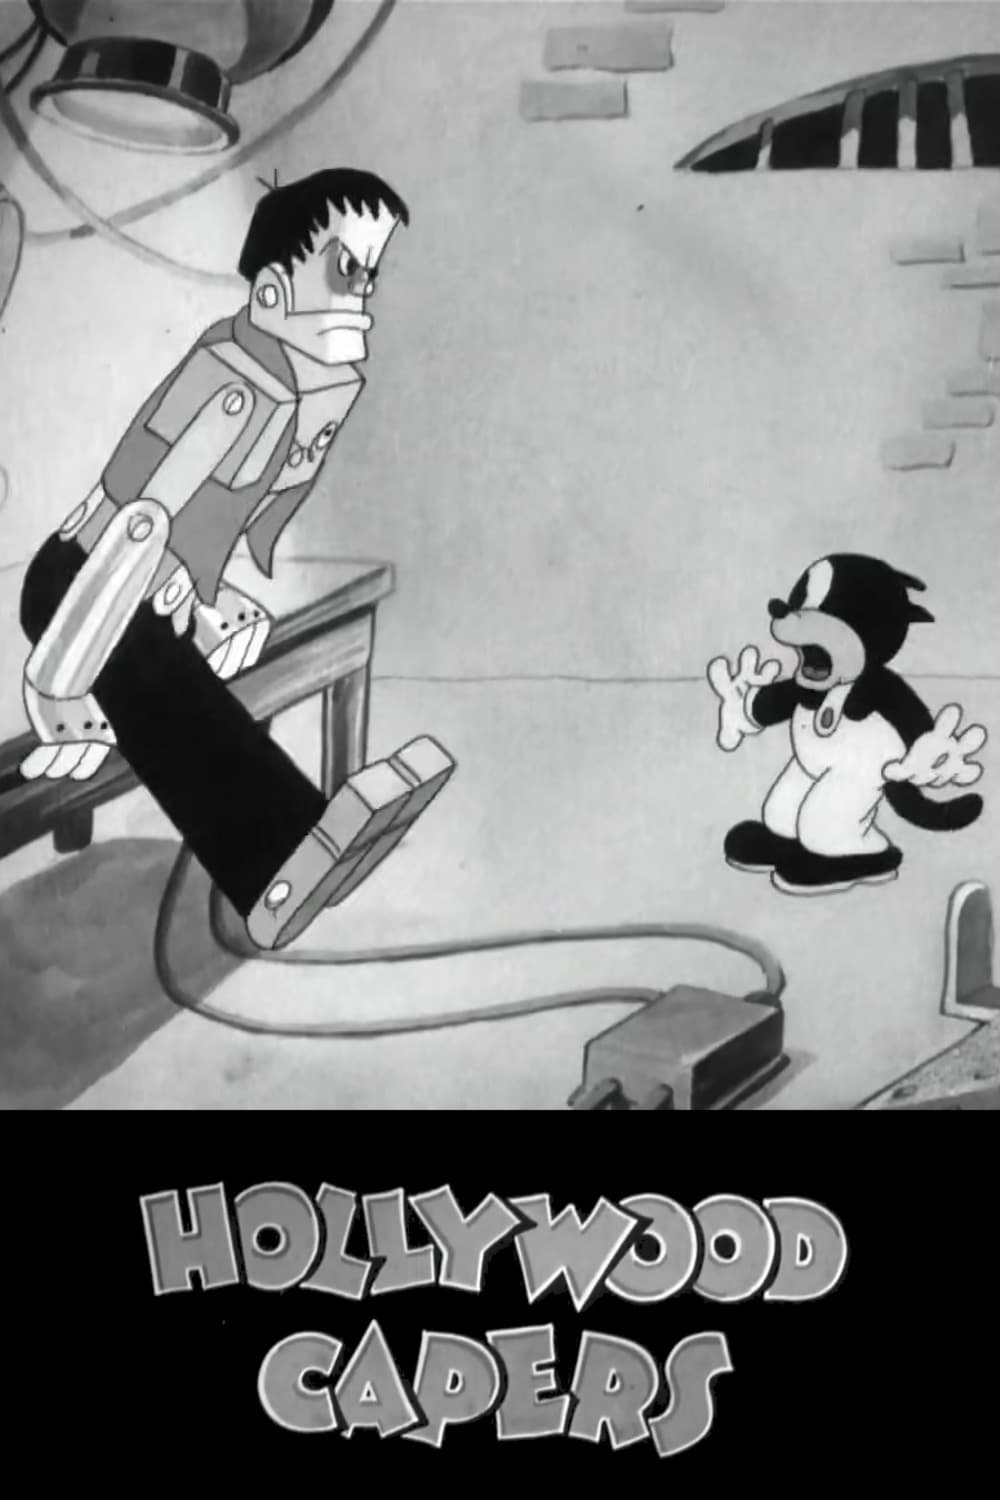 Hollywood Capers (1935)